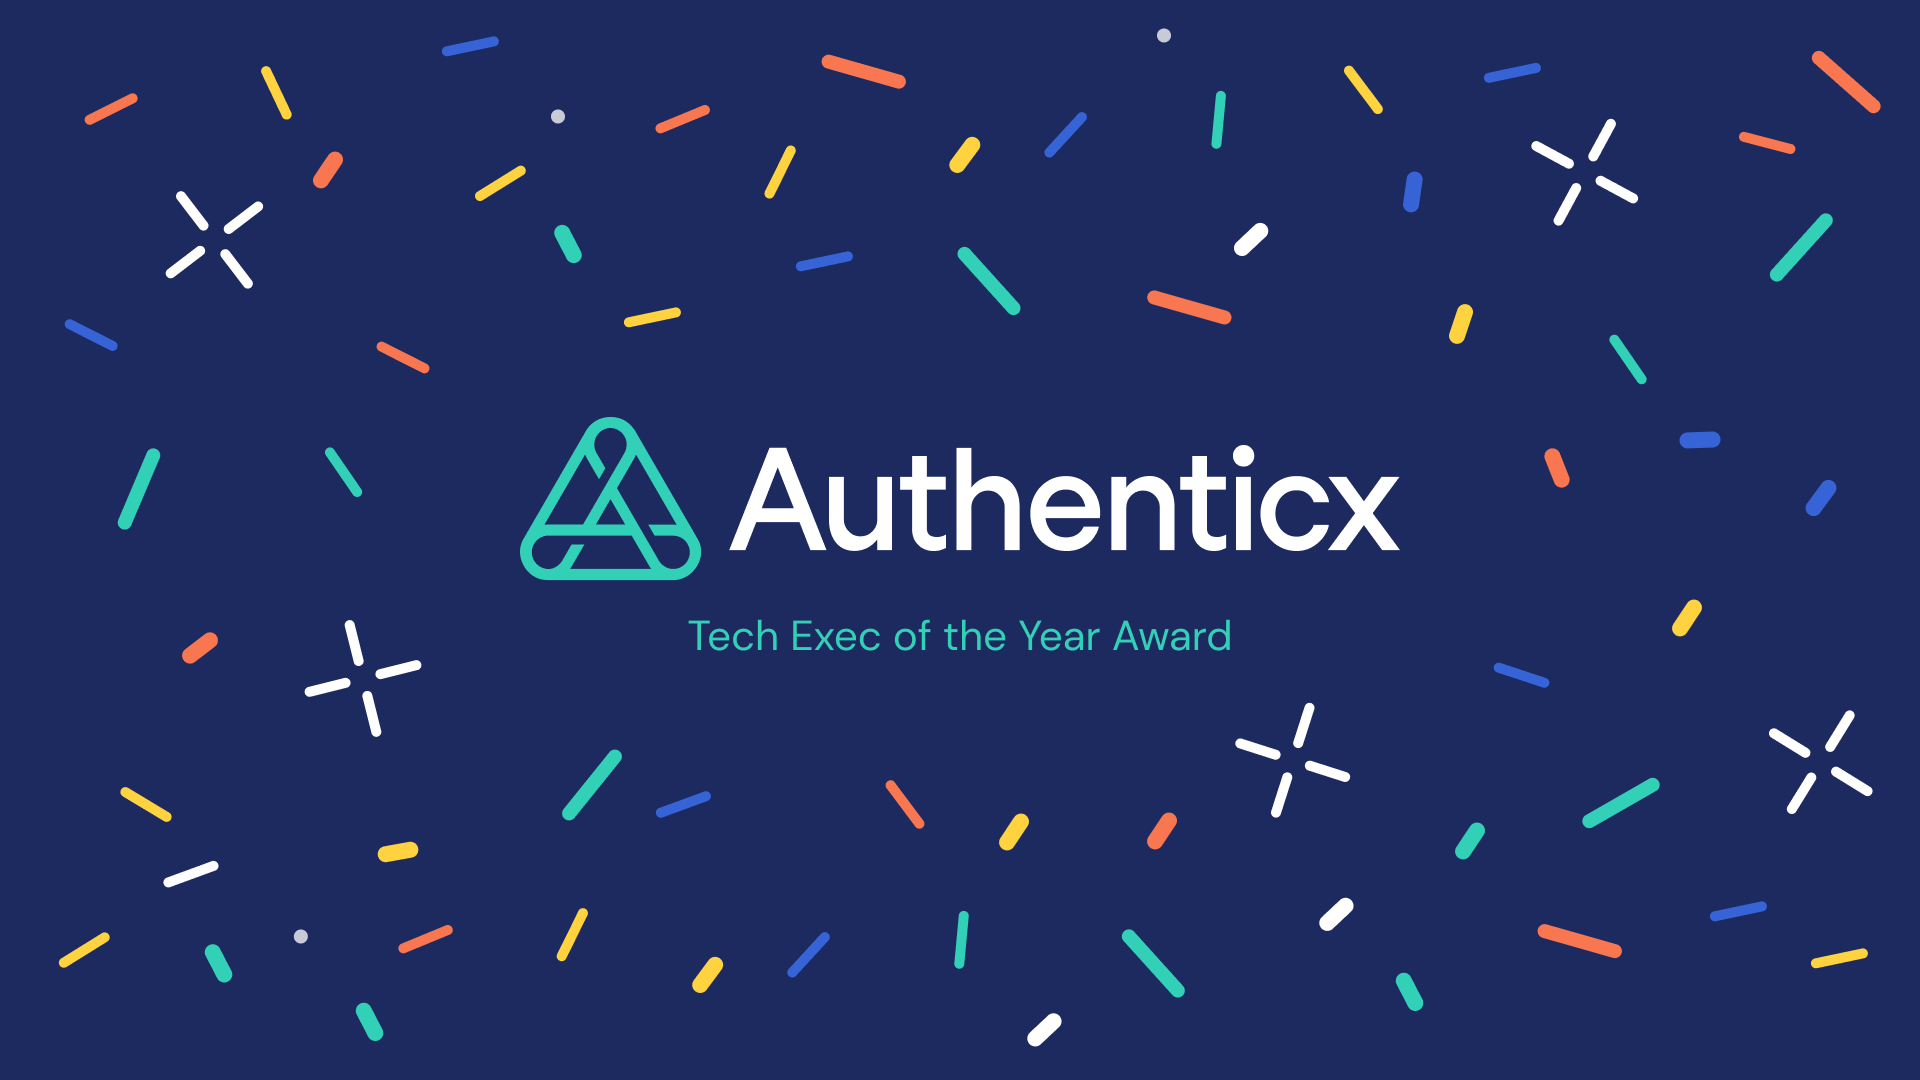 Authenticx Tech Exec of the Year Award Recognition | Authenticx